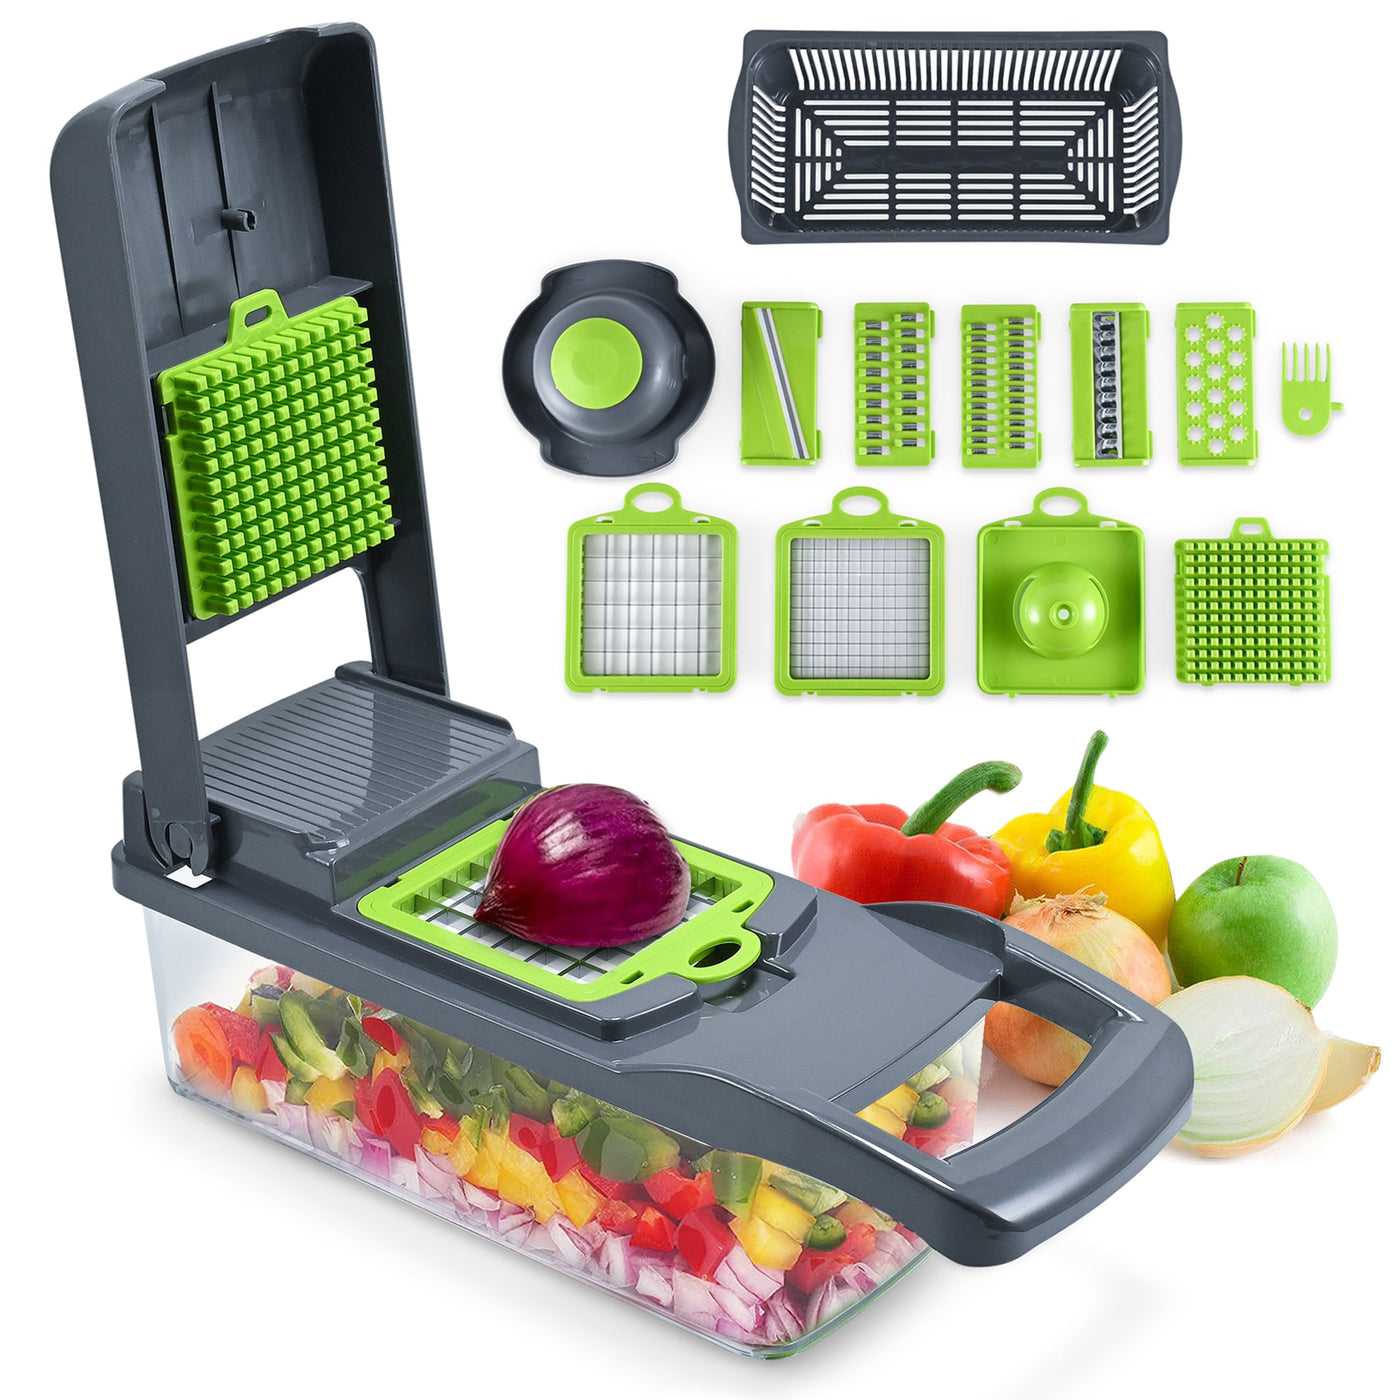 Cheer Collection 10 In 1 Food Slicer And Vegetable Cutter With 8